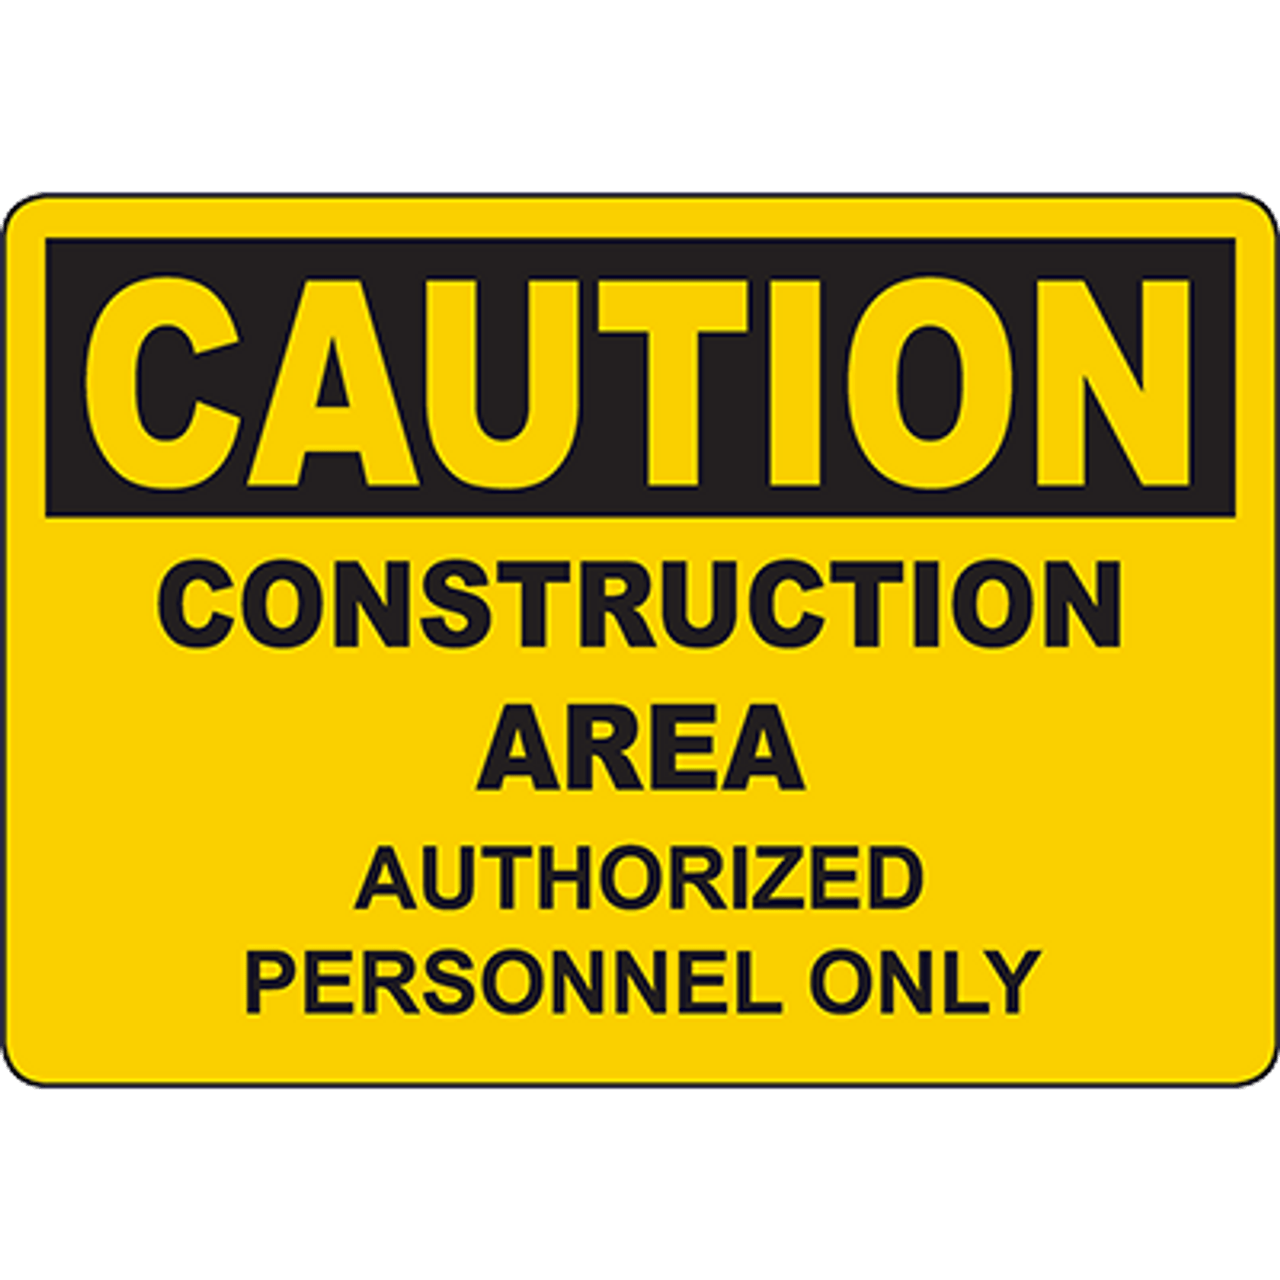 CAUTION Construction Area Authorized Personnel Only Sign | Graphic Products